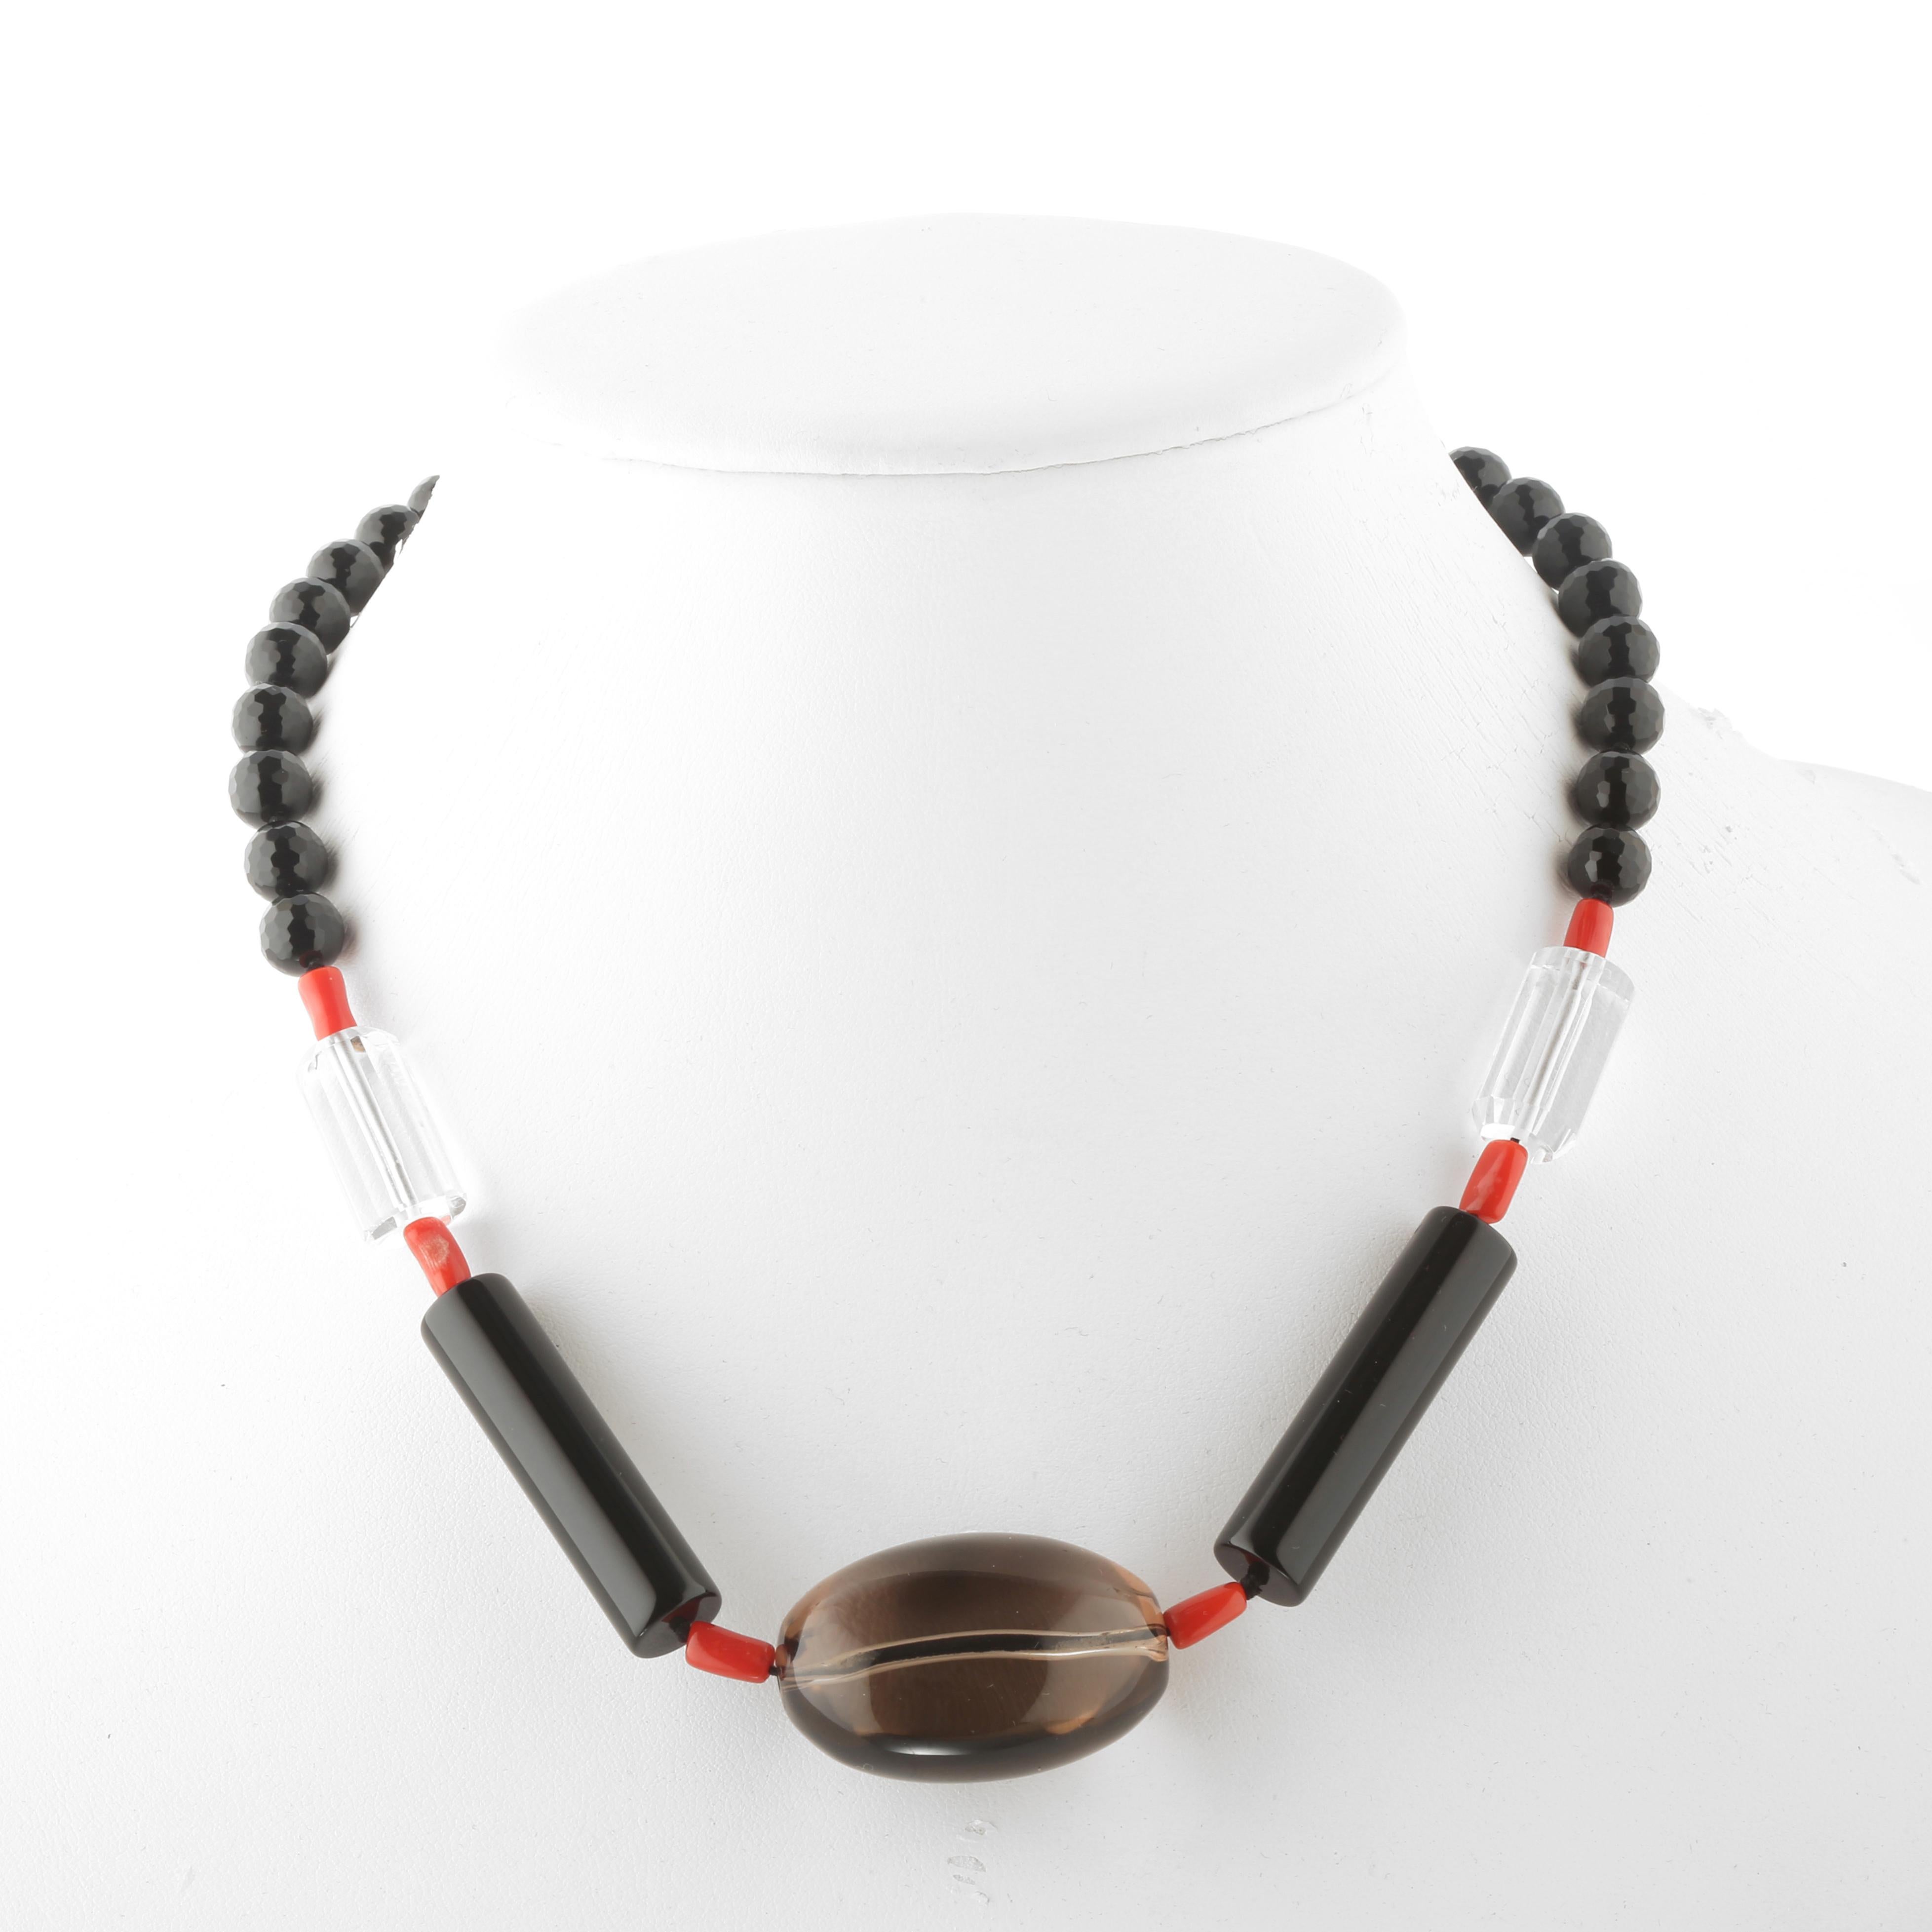 Immerse yourself in the beauty of this uniquely designed necklace with natural stones full of life and color. 
This necklace is inspired by the bright light of the moon during clear sky nights.

Choker necklace with faceted black Agate, Natural